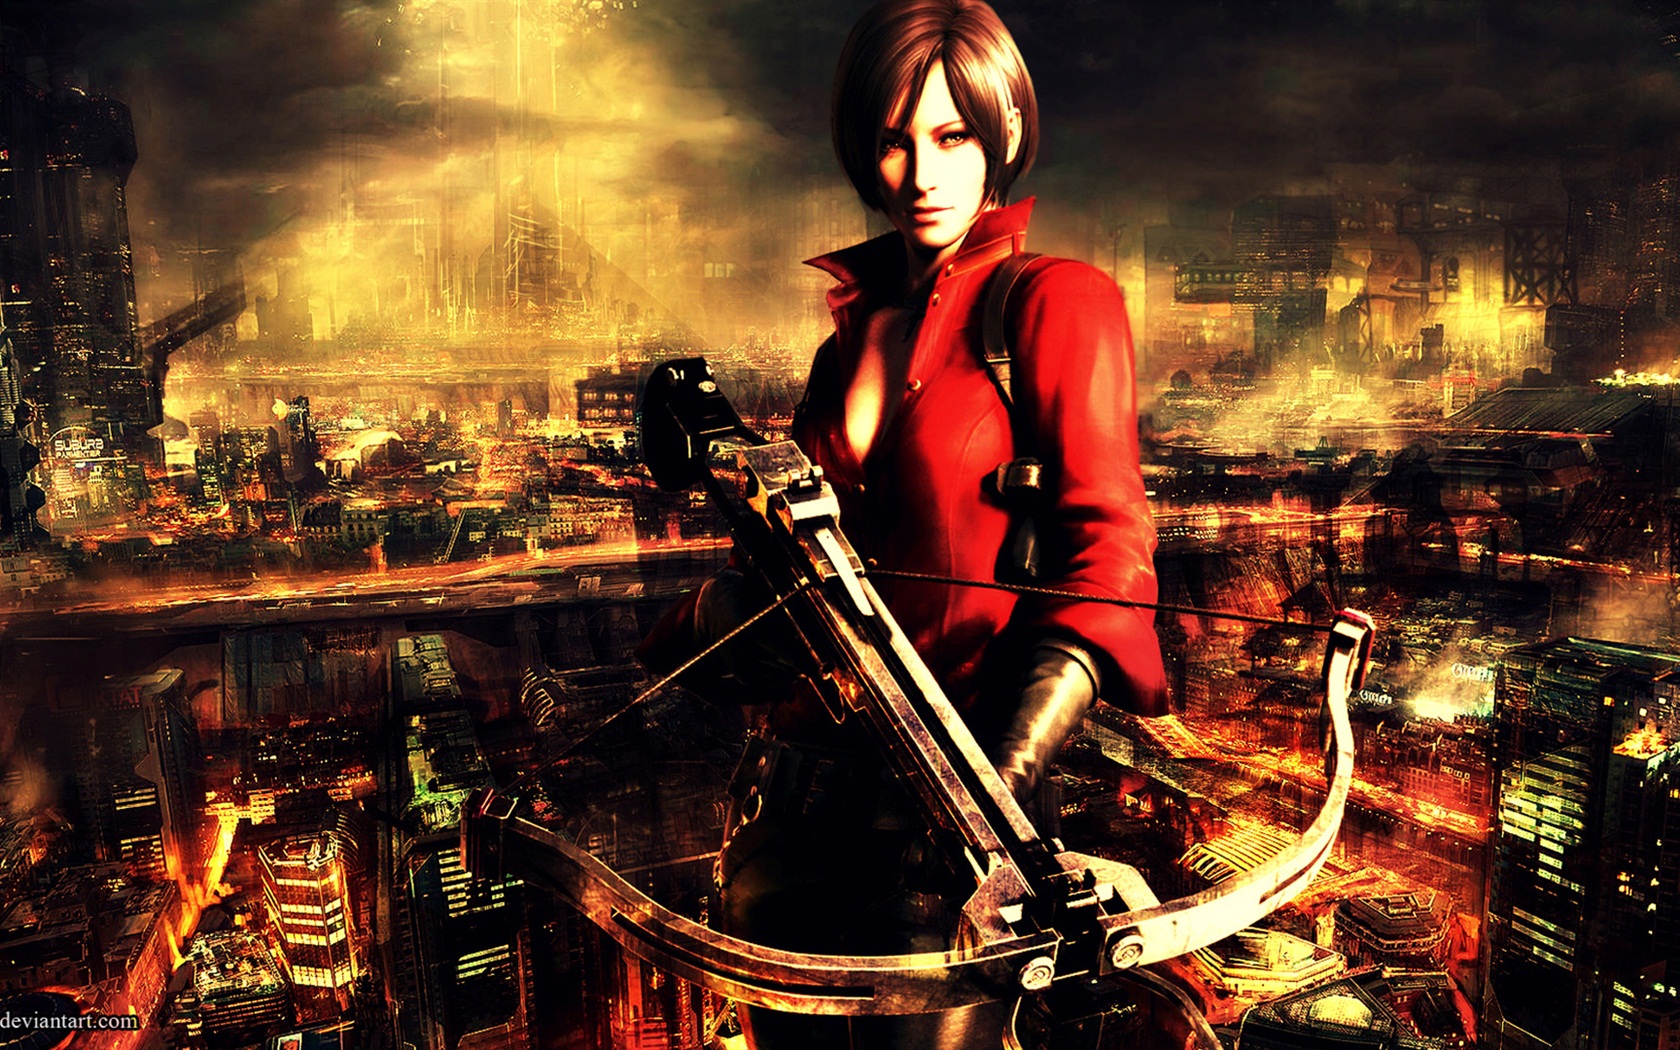 Resident Evil 6 HD game wallpapers #7 - 1680x1050